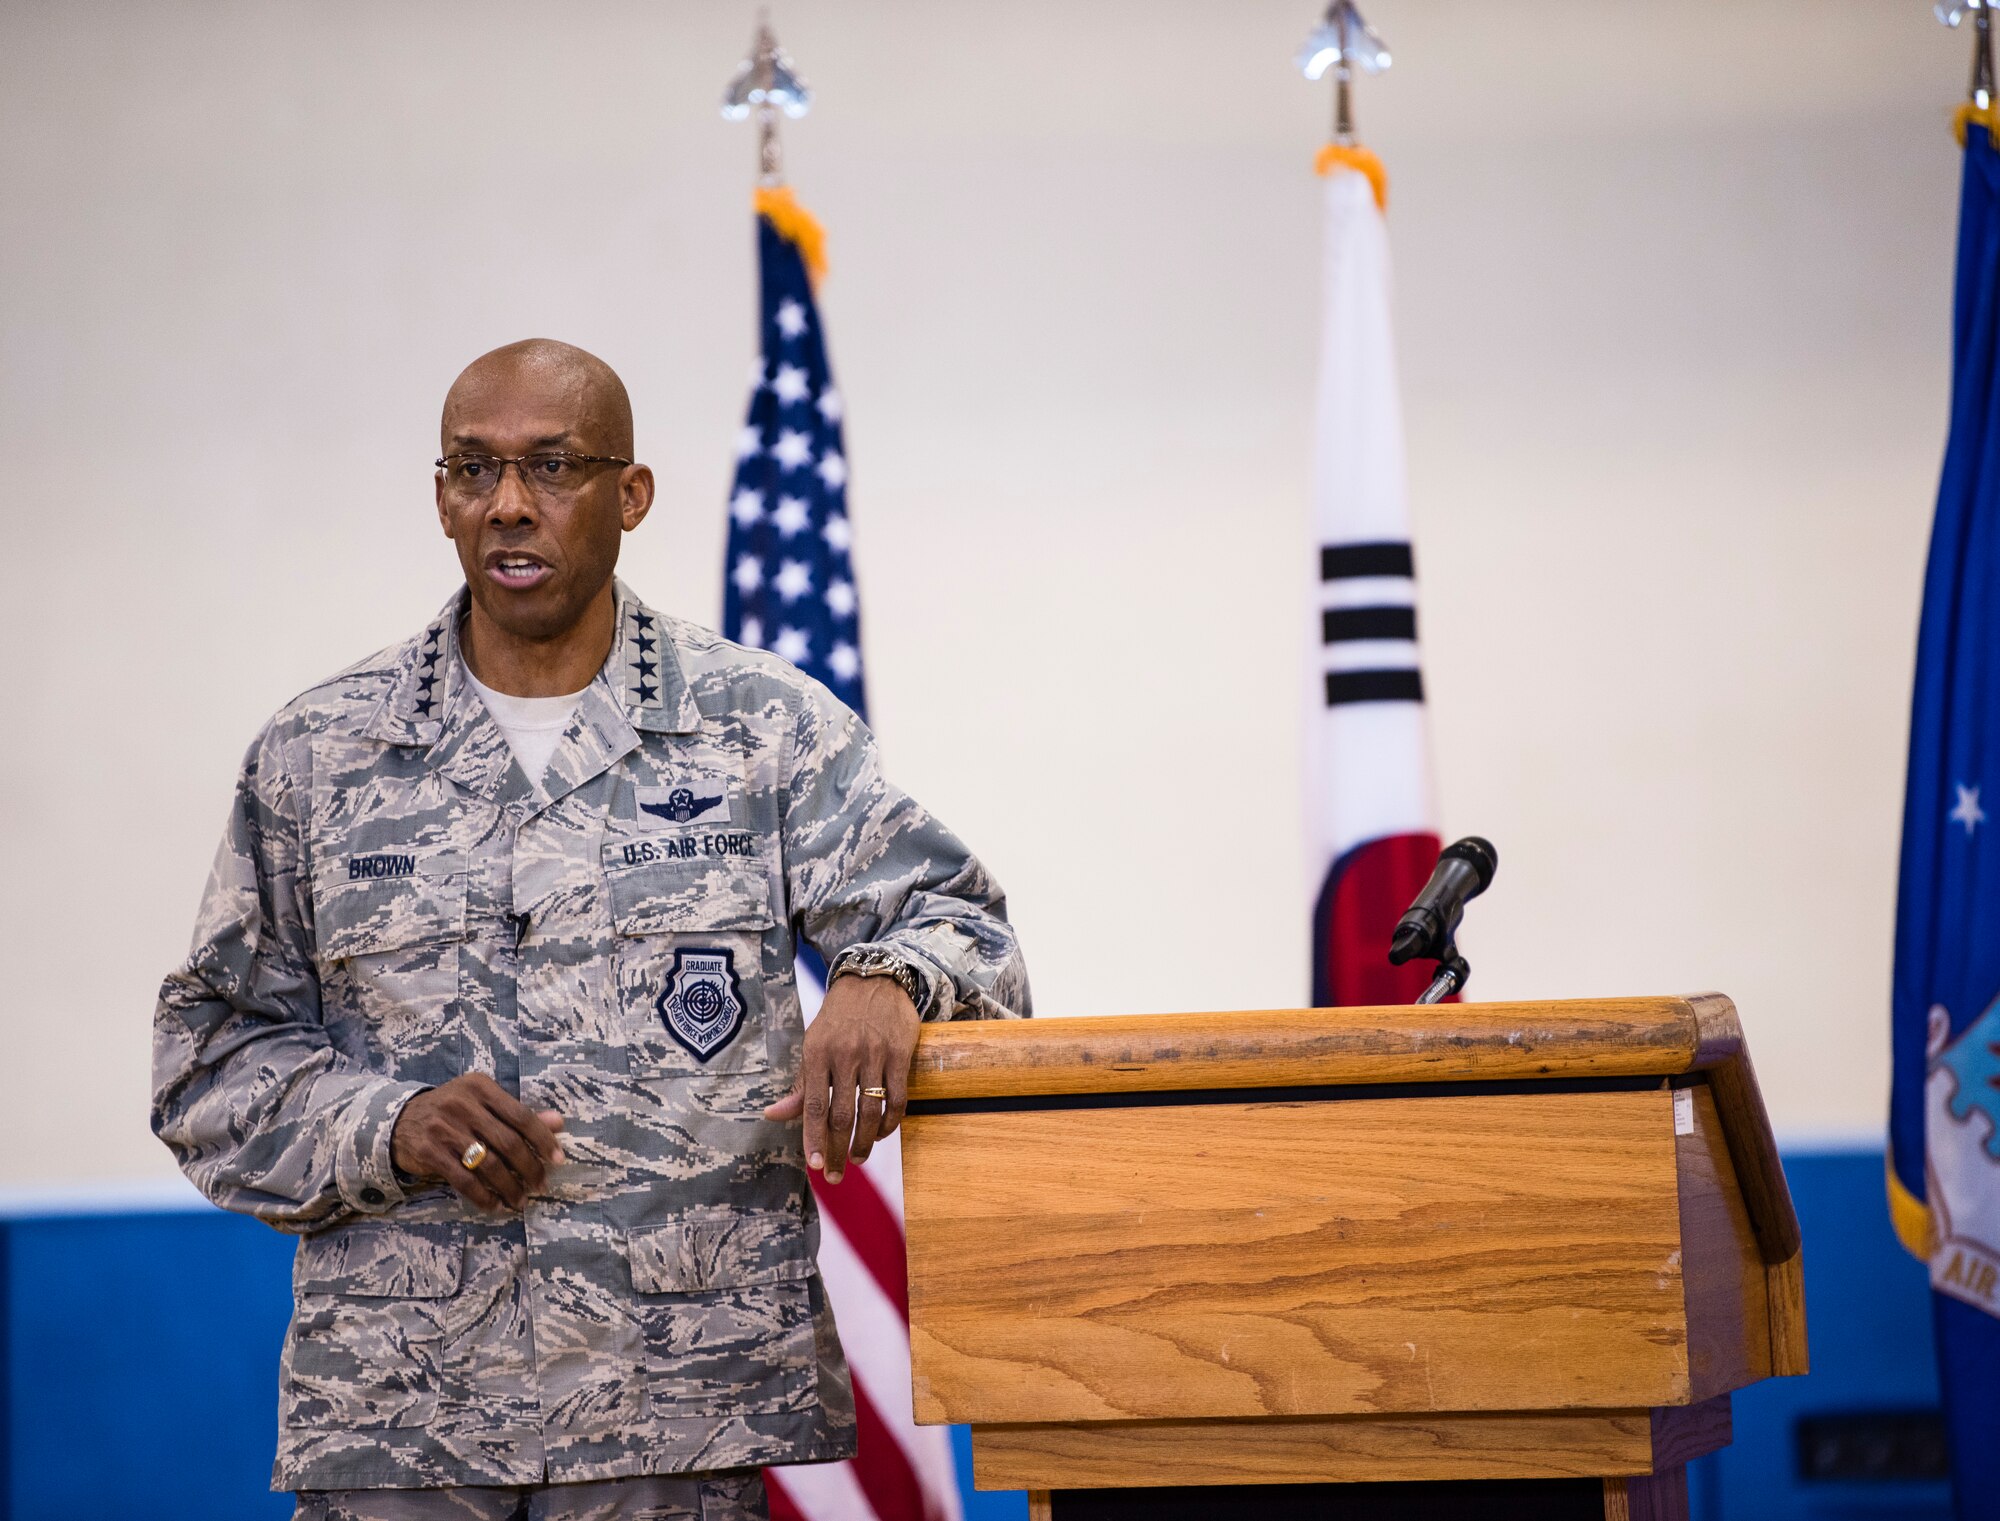 U.S. Air Force Gen. CQ Brown, Jr., Pacific Air Forces commander, speaks to 8th Fighter Wing “Wolf Pack” Airmen during an all-call at Kunsan Air Base, Republic of Korea, Aug. 29, 2018. In addition to the all-call, Brown interfaced with 8th Fighter Wing Airmen throughout the day’s activities, including a security forces demonstration, an air traffic control brief and maintenance operations brief. (U.S. Air Force photo by Senior Airman Stefan Alvarez)